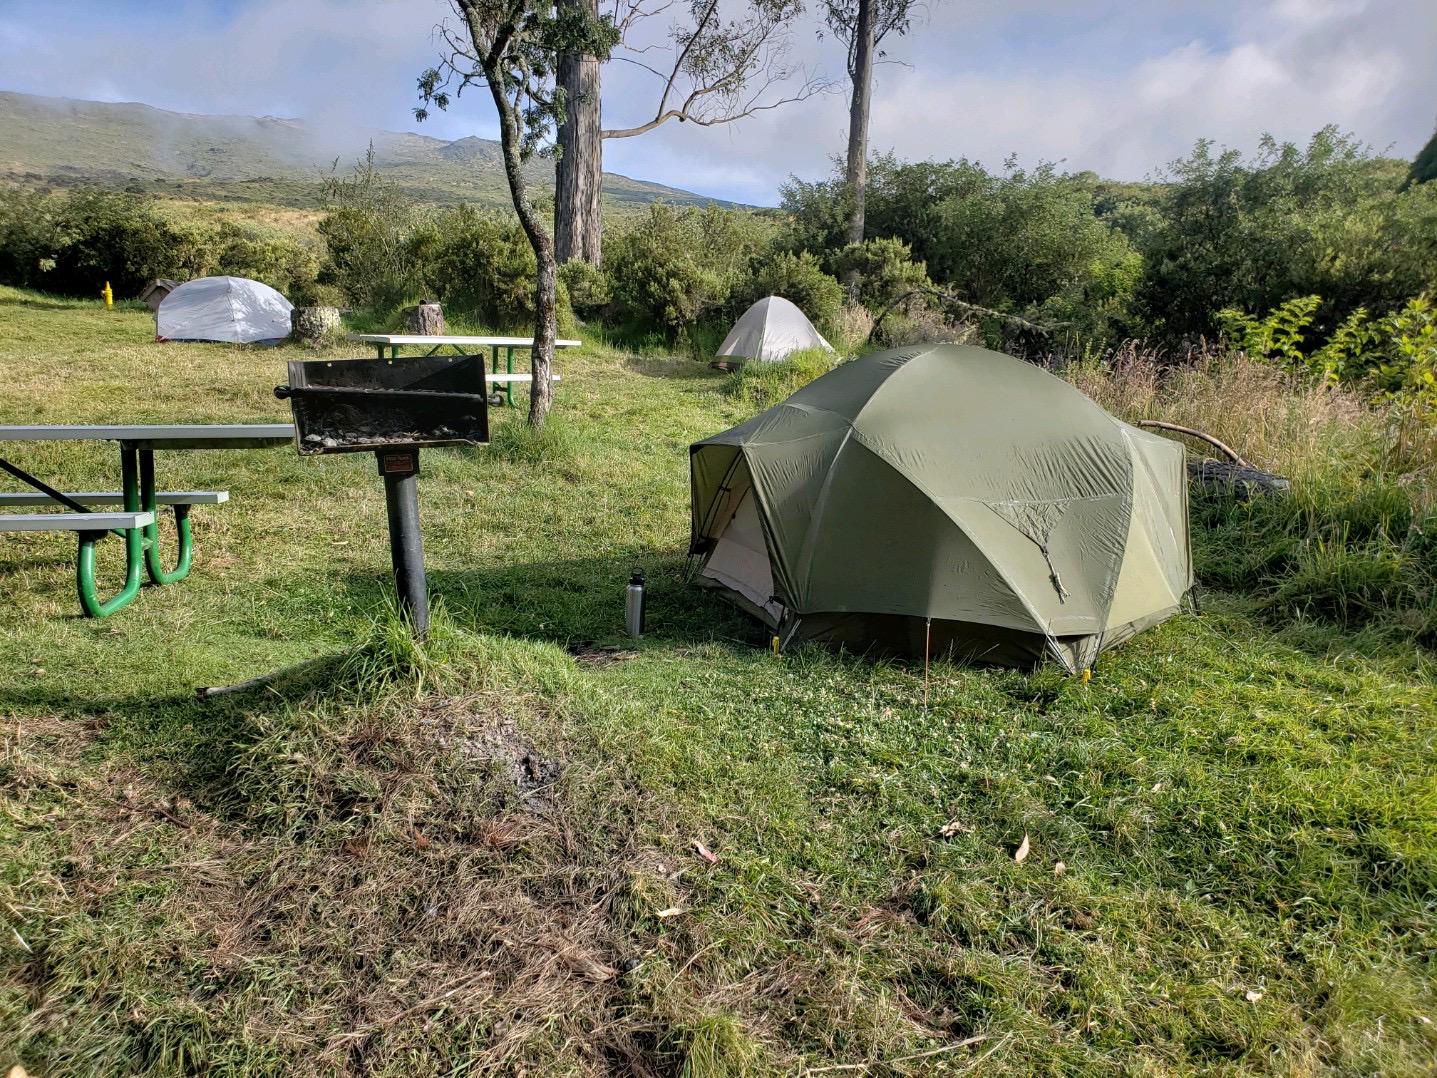 A gray tent is pitched next to a grill and picnic table. Tall shrubs and grass line the area.